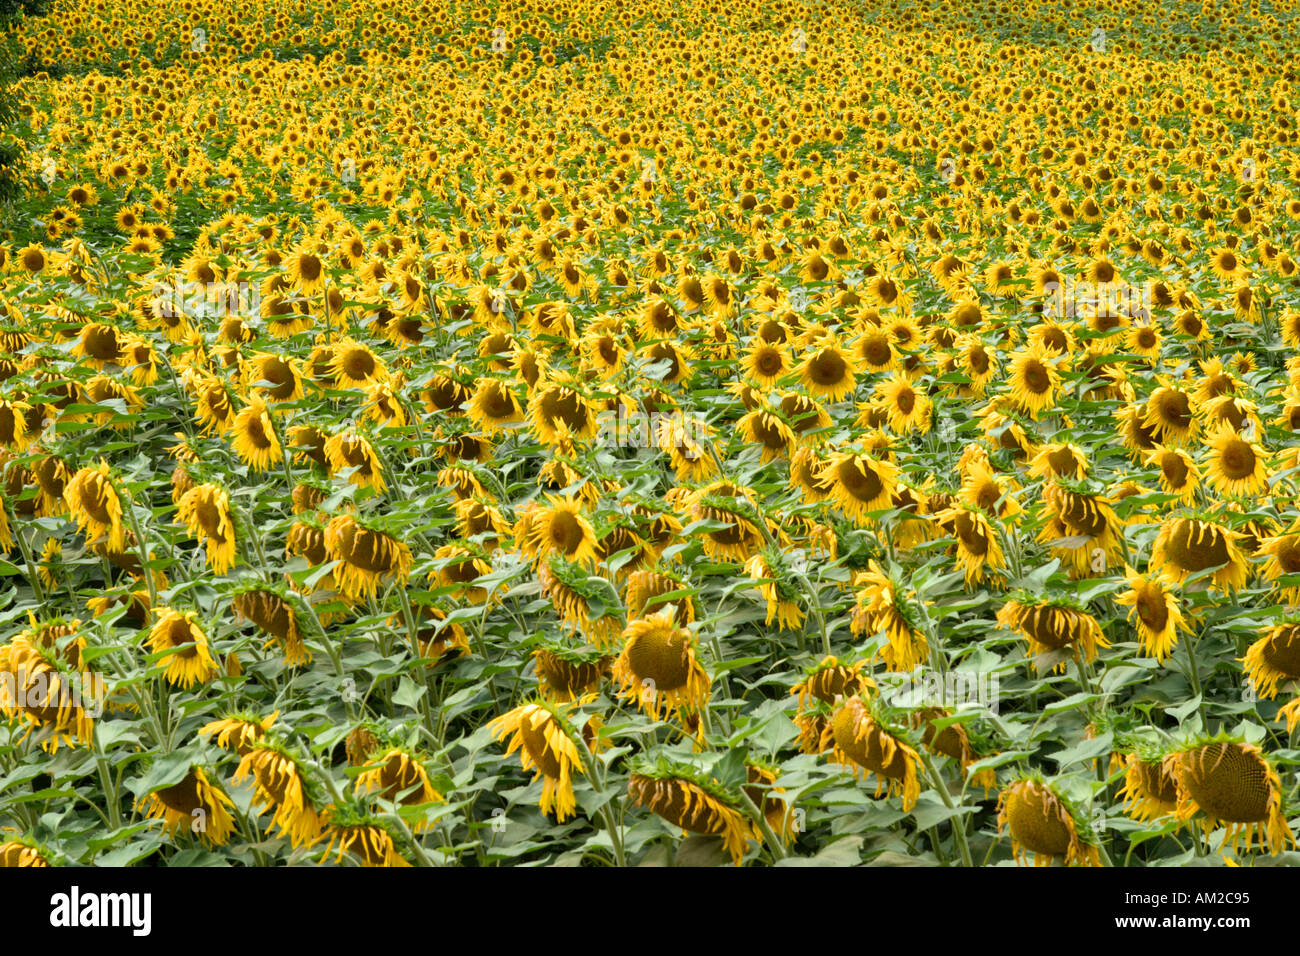 Sunflowers, Southern France Stock Photo